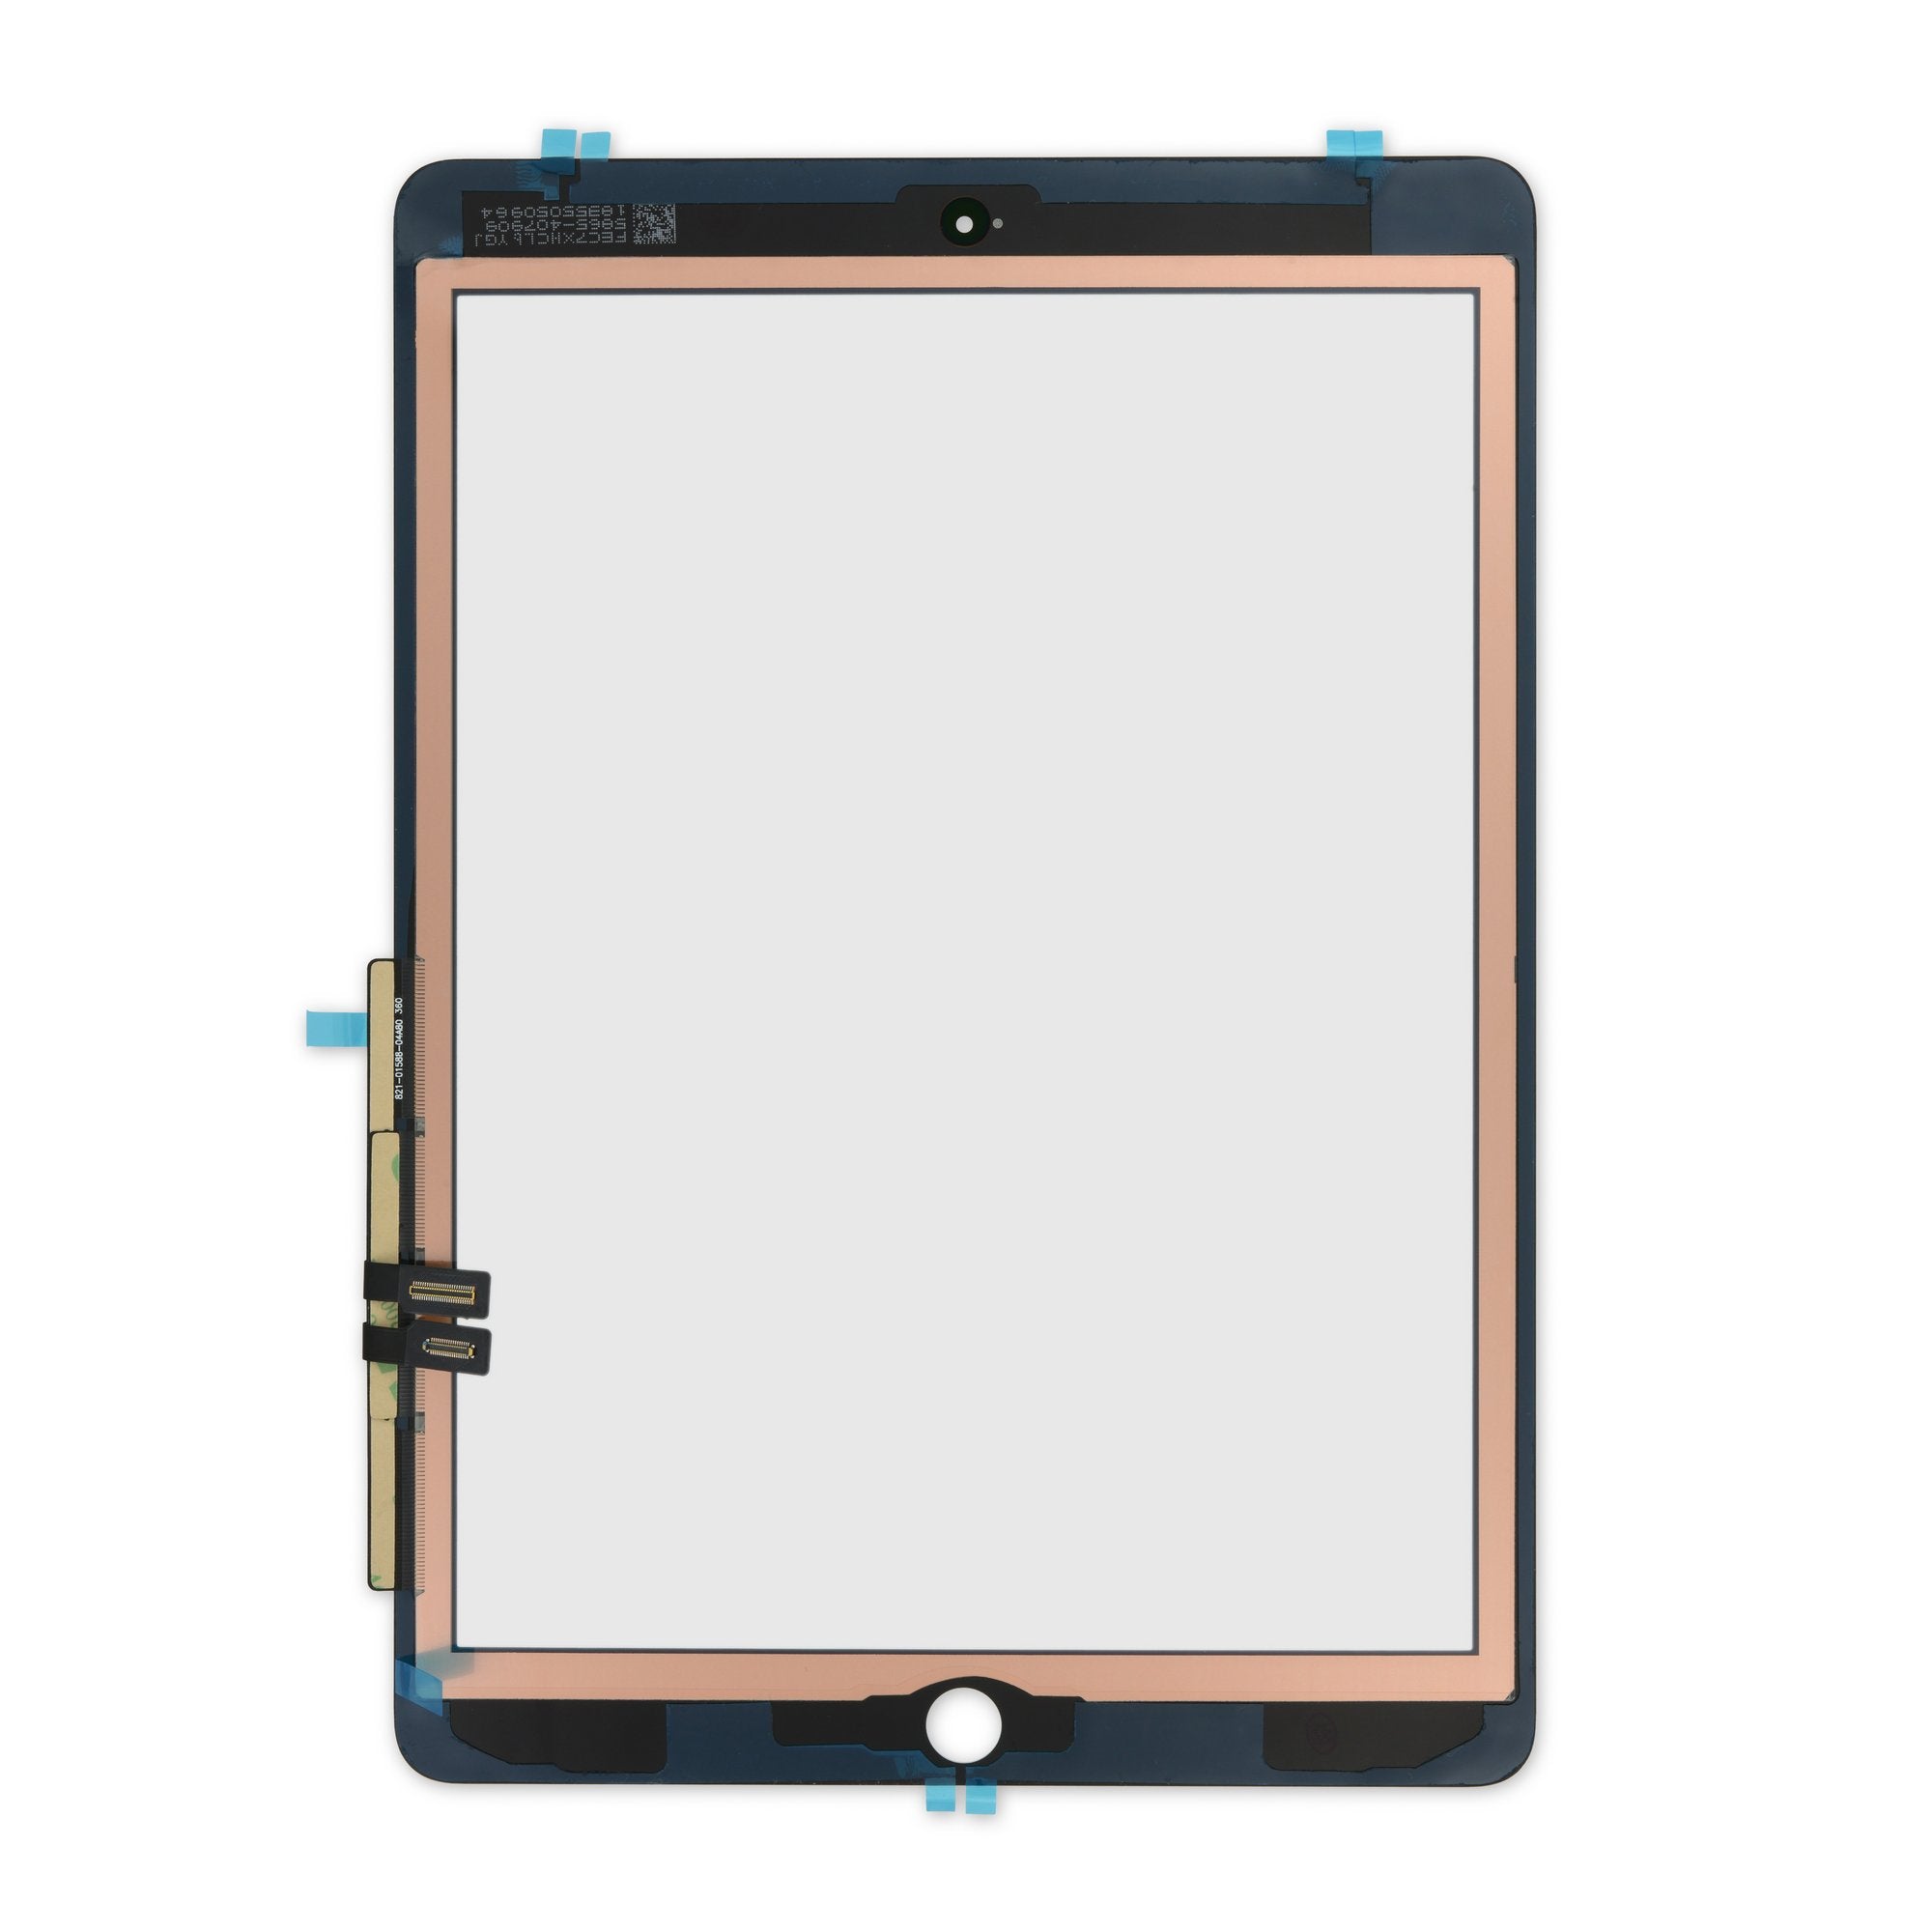 SRJTEK Touch Screen Digitizer for iPad 9.7 2018 iPad 6 6th Gen A1893 A1954  Glass Replacement Repair Parts (NO LCD, Without Home Button)+Pre-Installed  Adhesive+Tools+Tempered Glass 